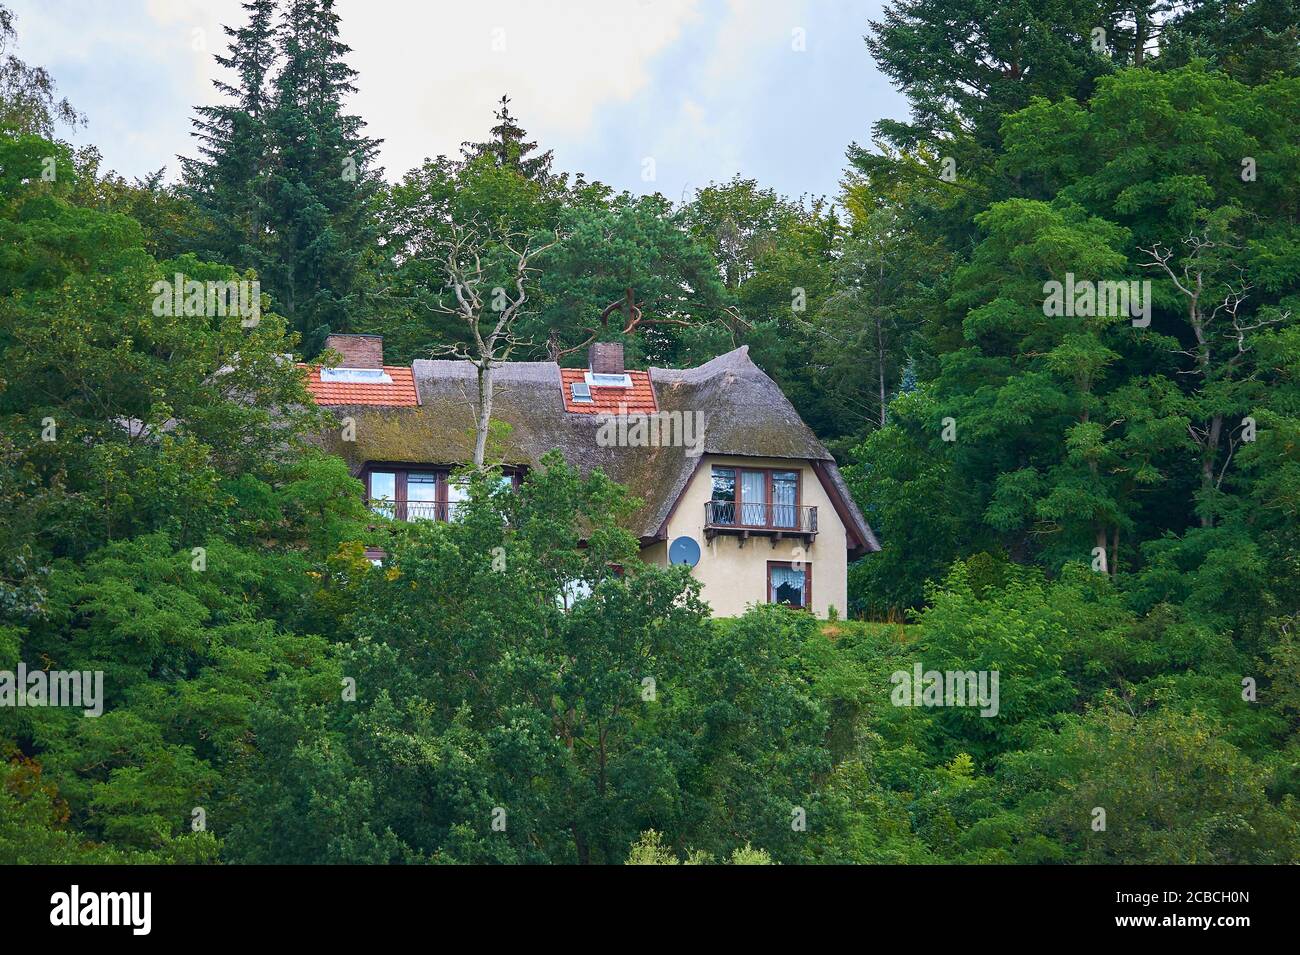 An old country house in the forest above Elbe river, Boizenburg, Northern Germany Stock Photo